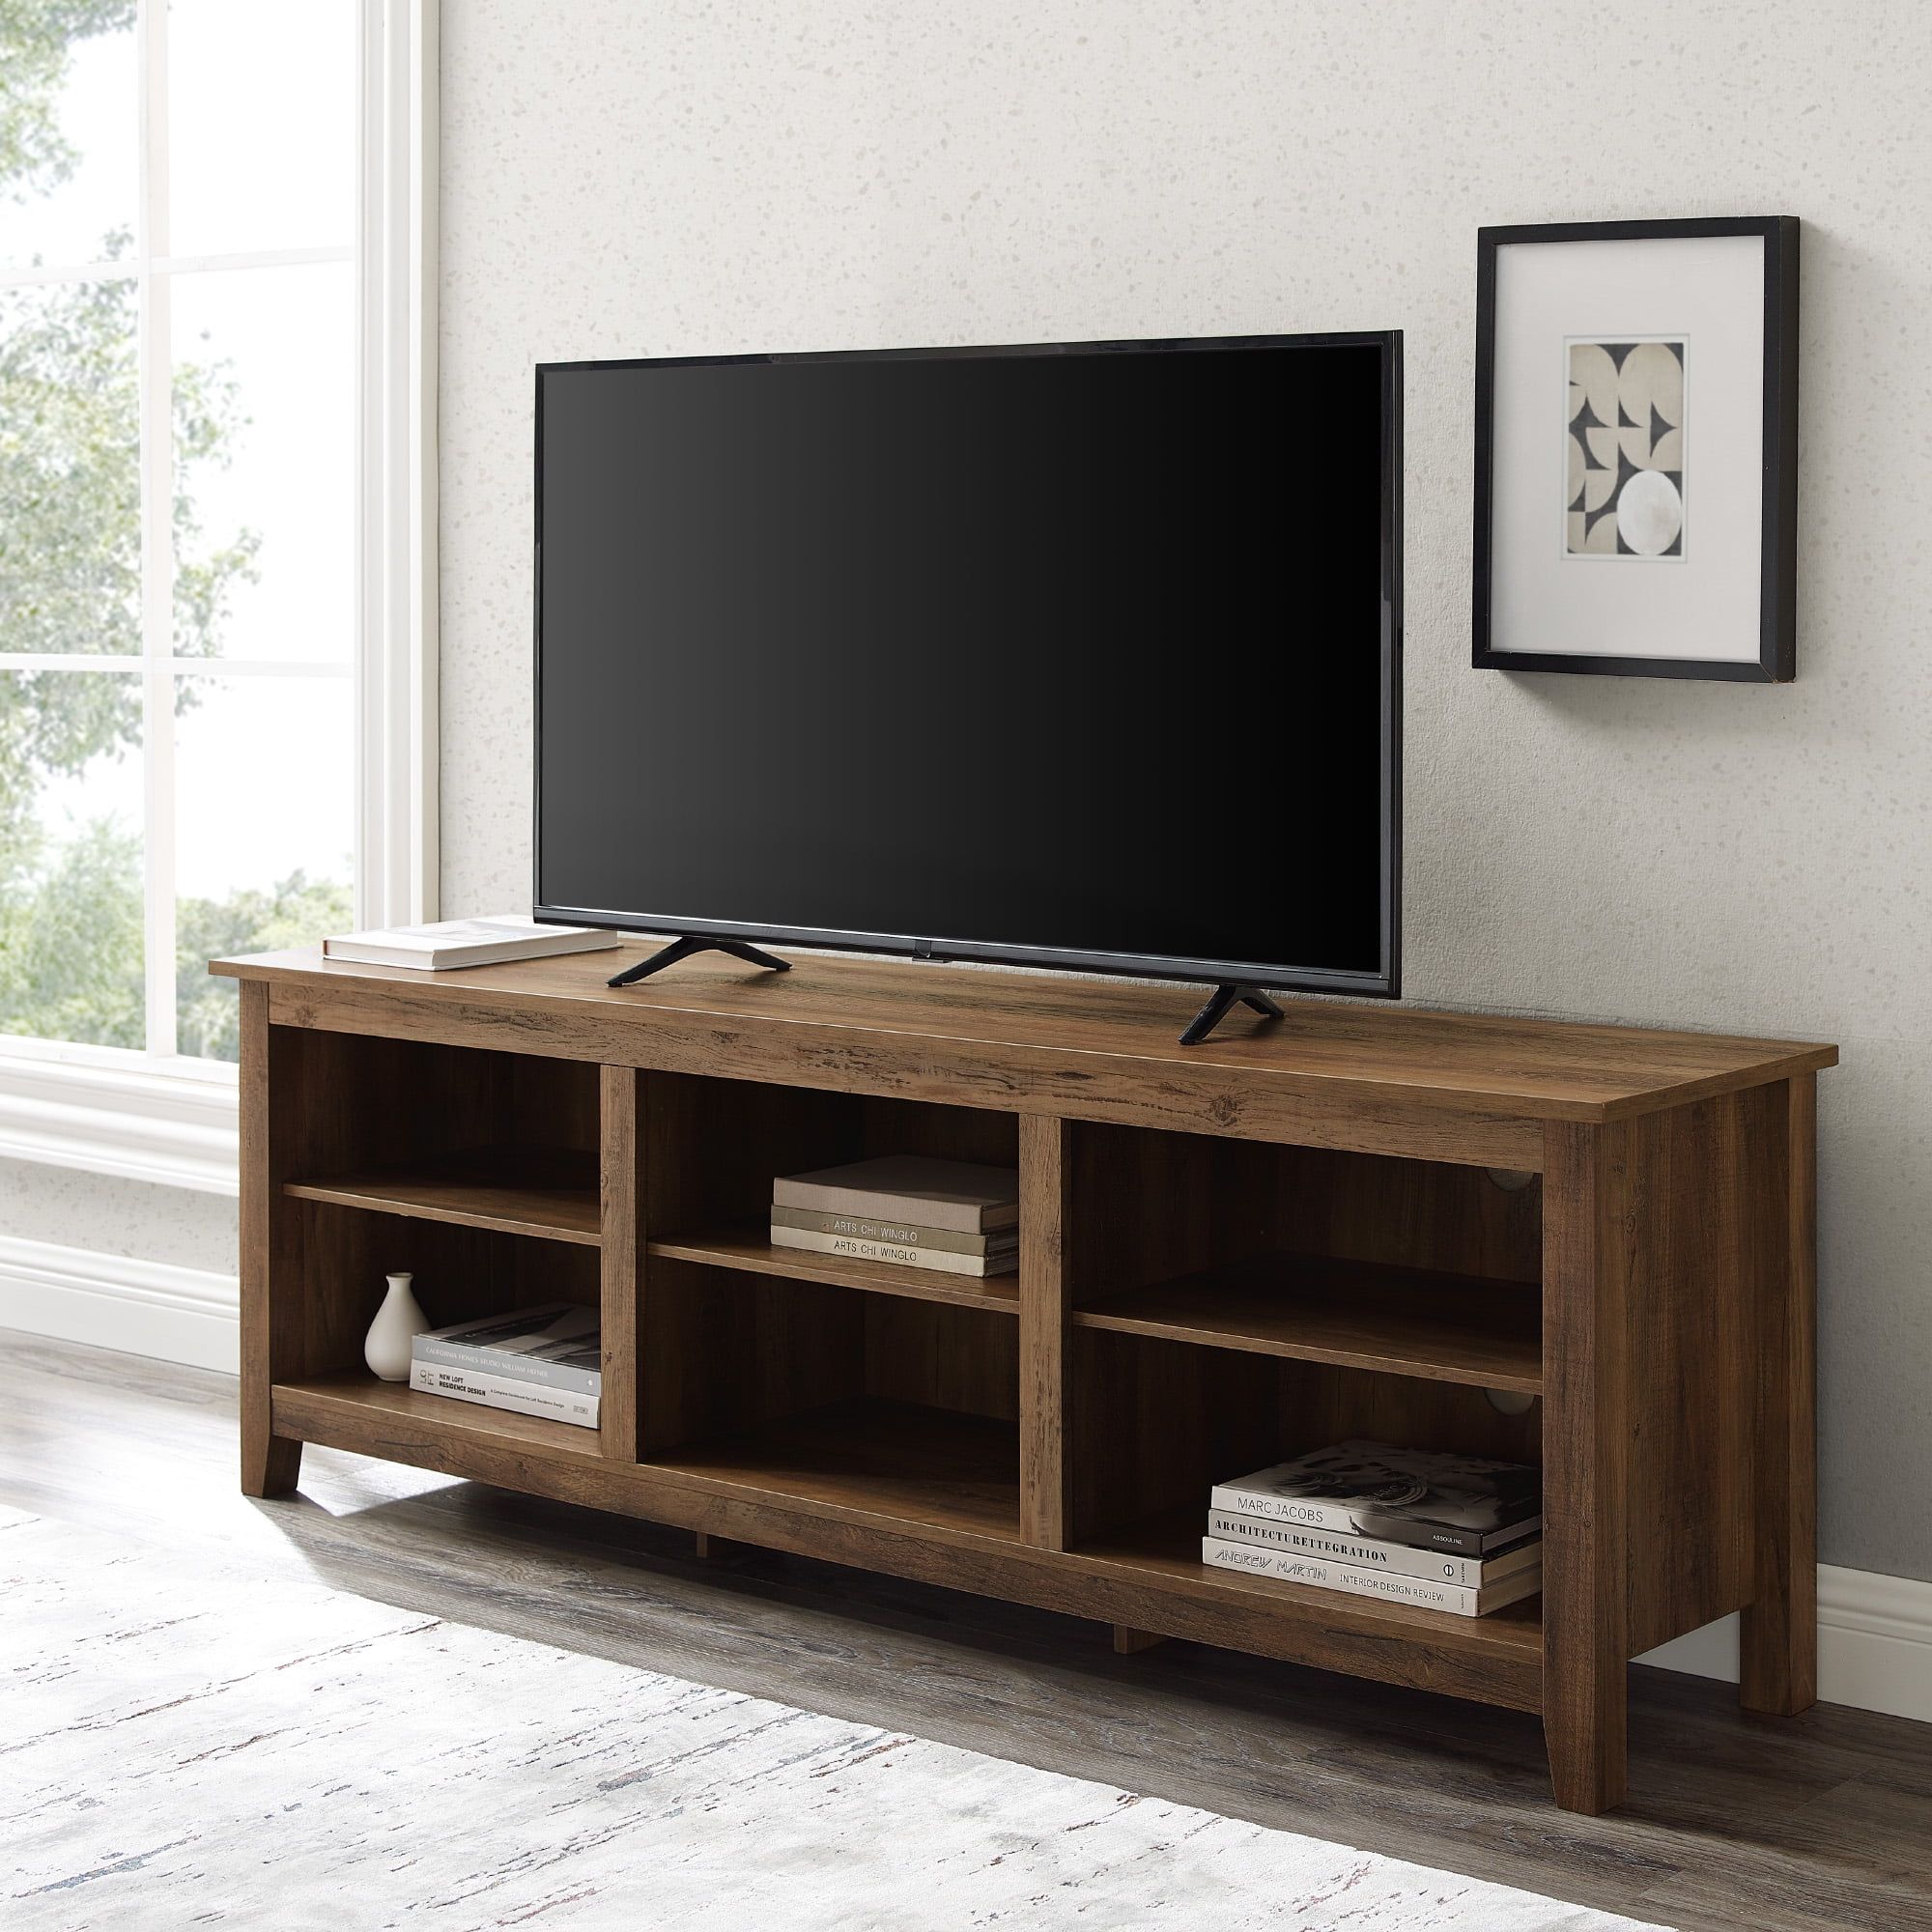 Woven Paths Open Storage Tv Stand For Tvs Up To 80", Reclaimed Barnwood Regarding Cafe Tv Stands With Storage (Gallery 7 of 20)